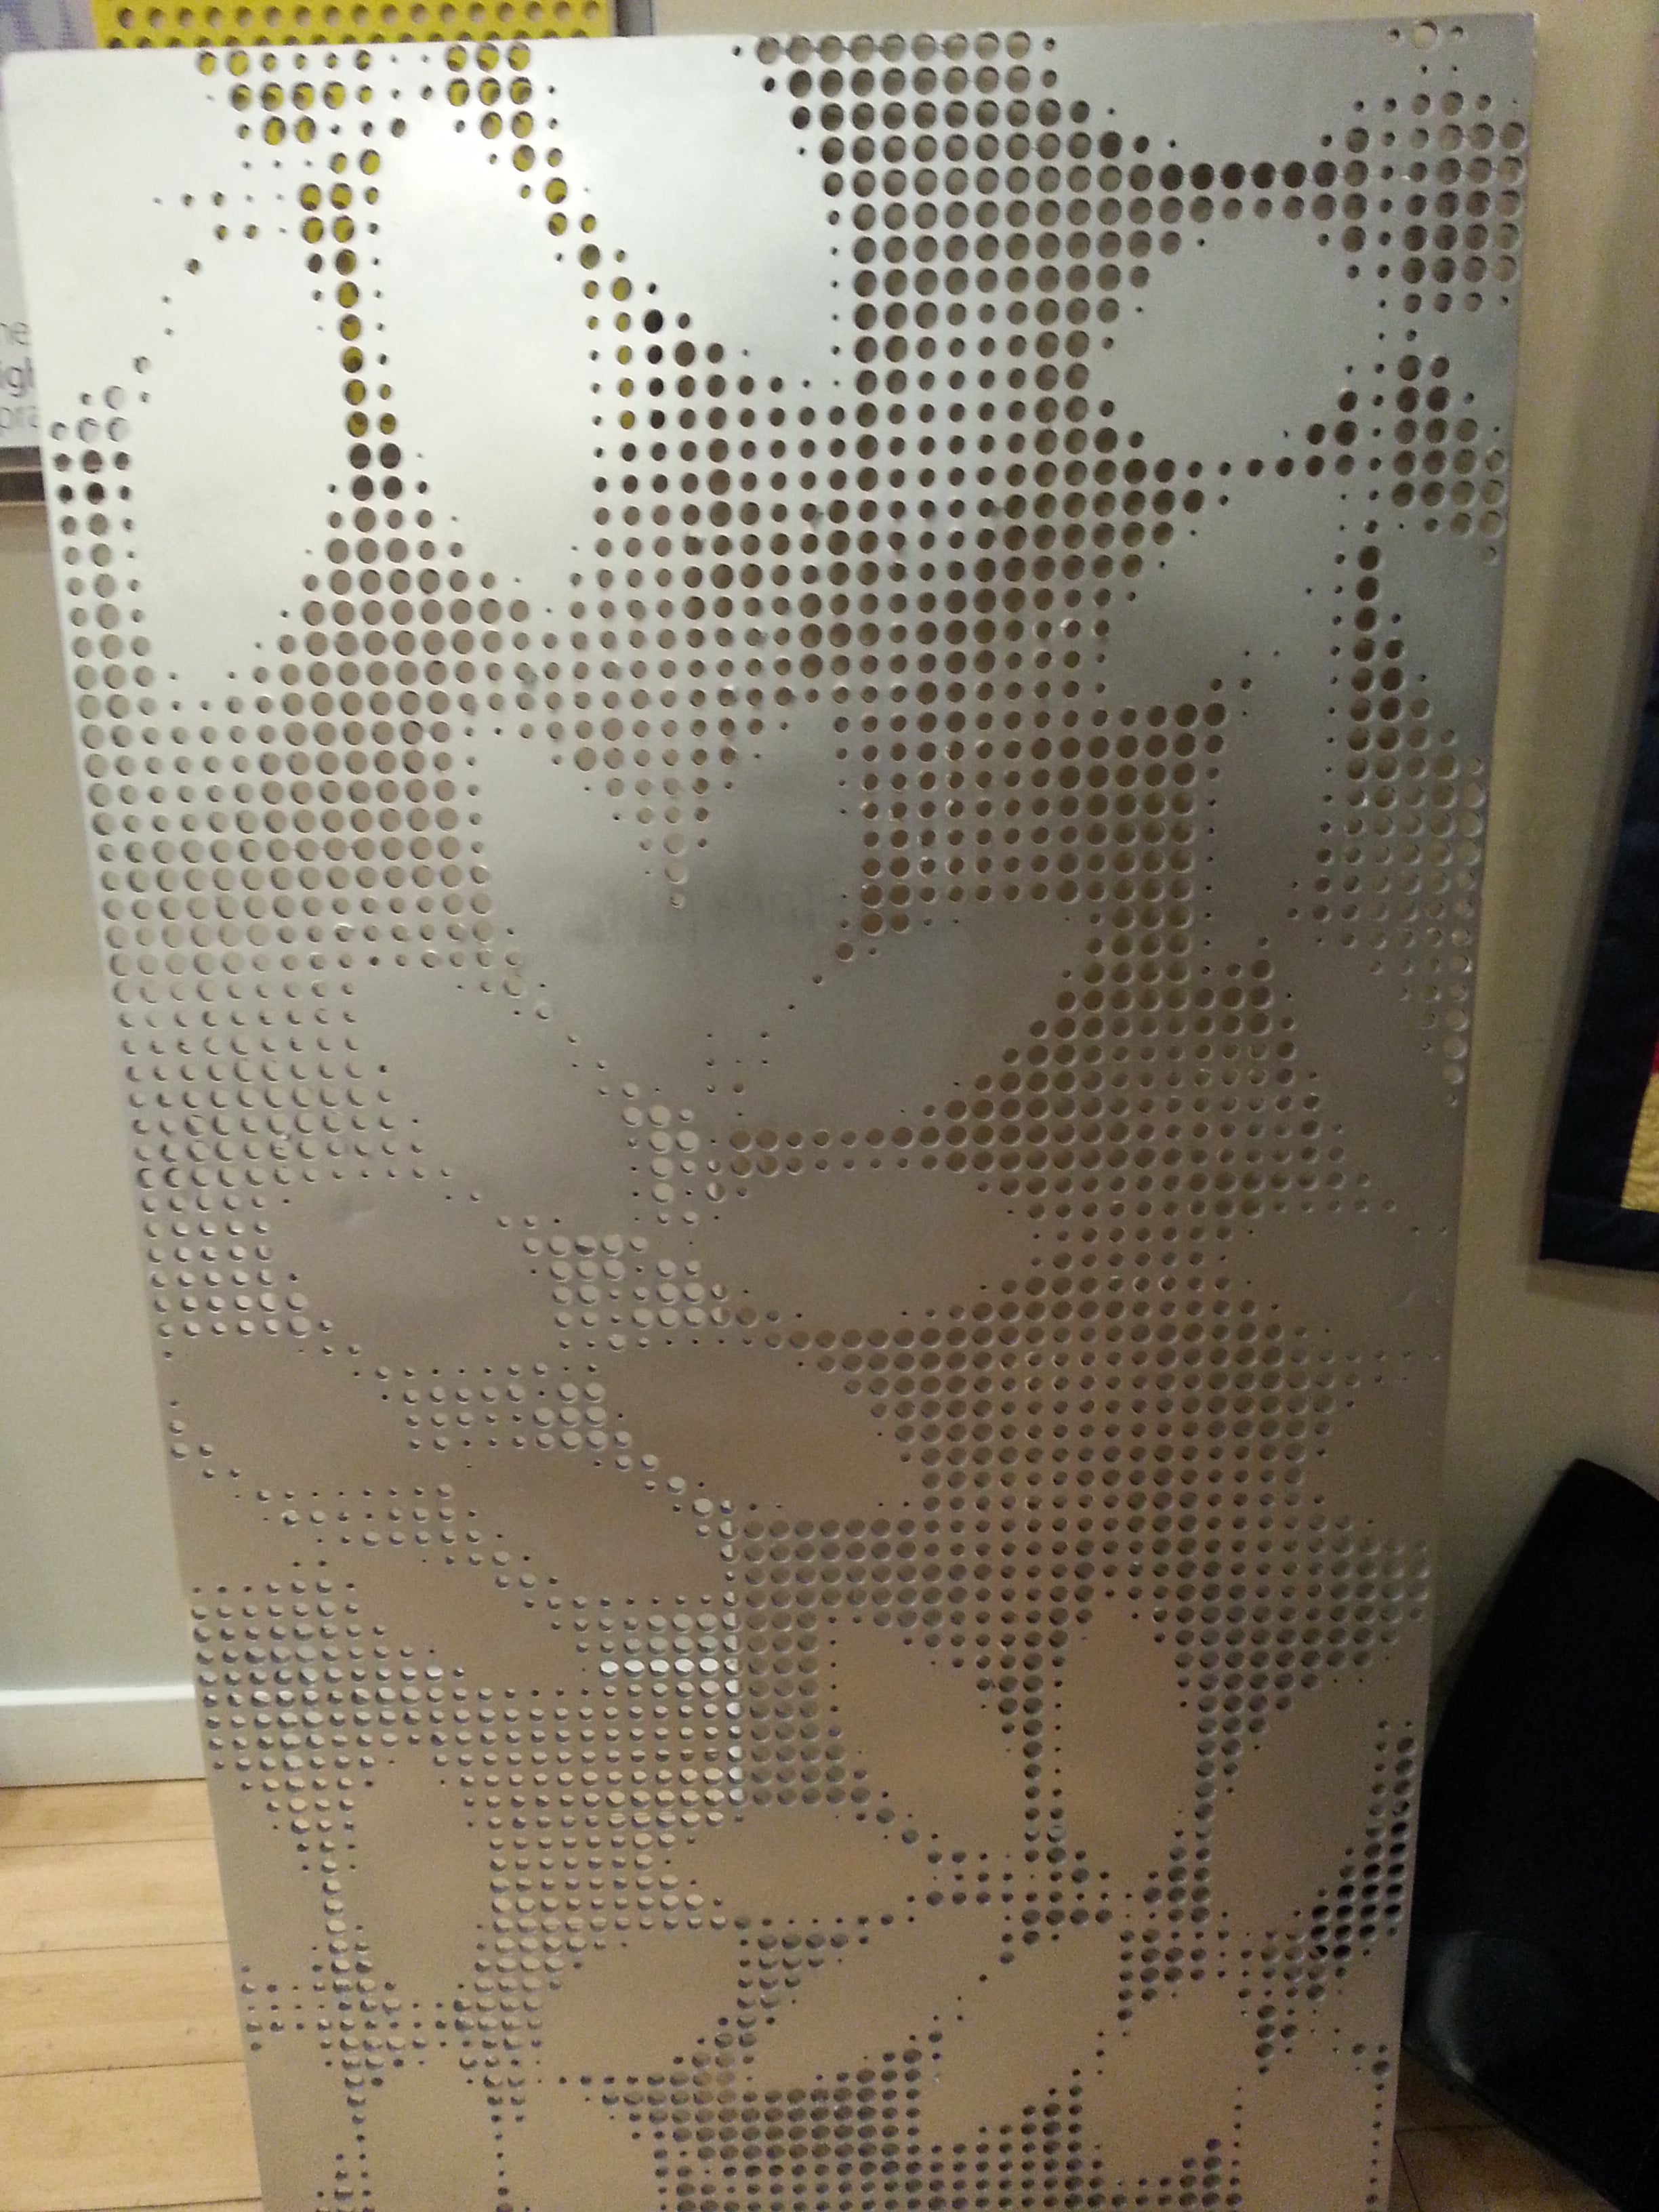 A mock-up of the water jet-cut screen